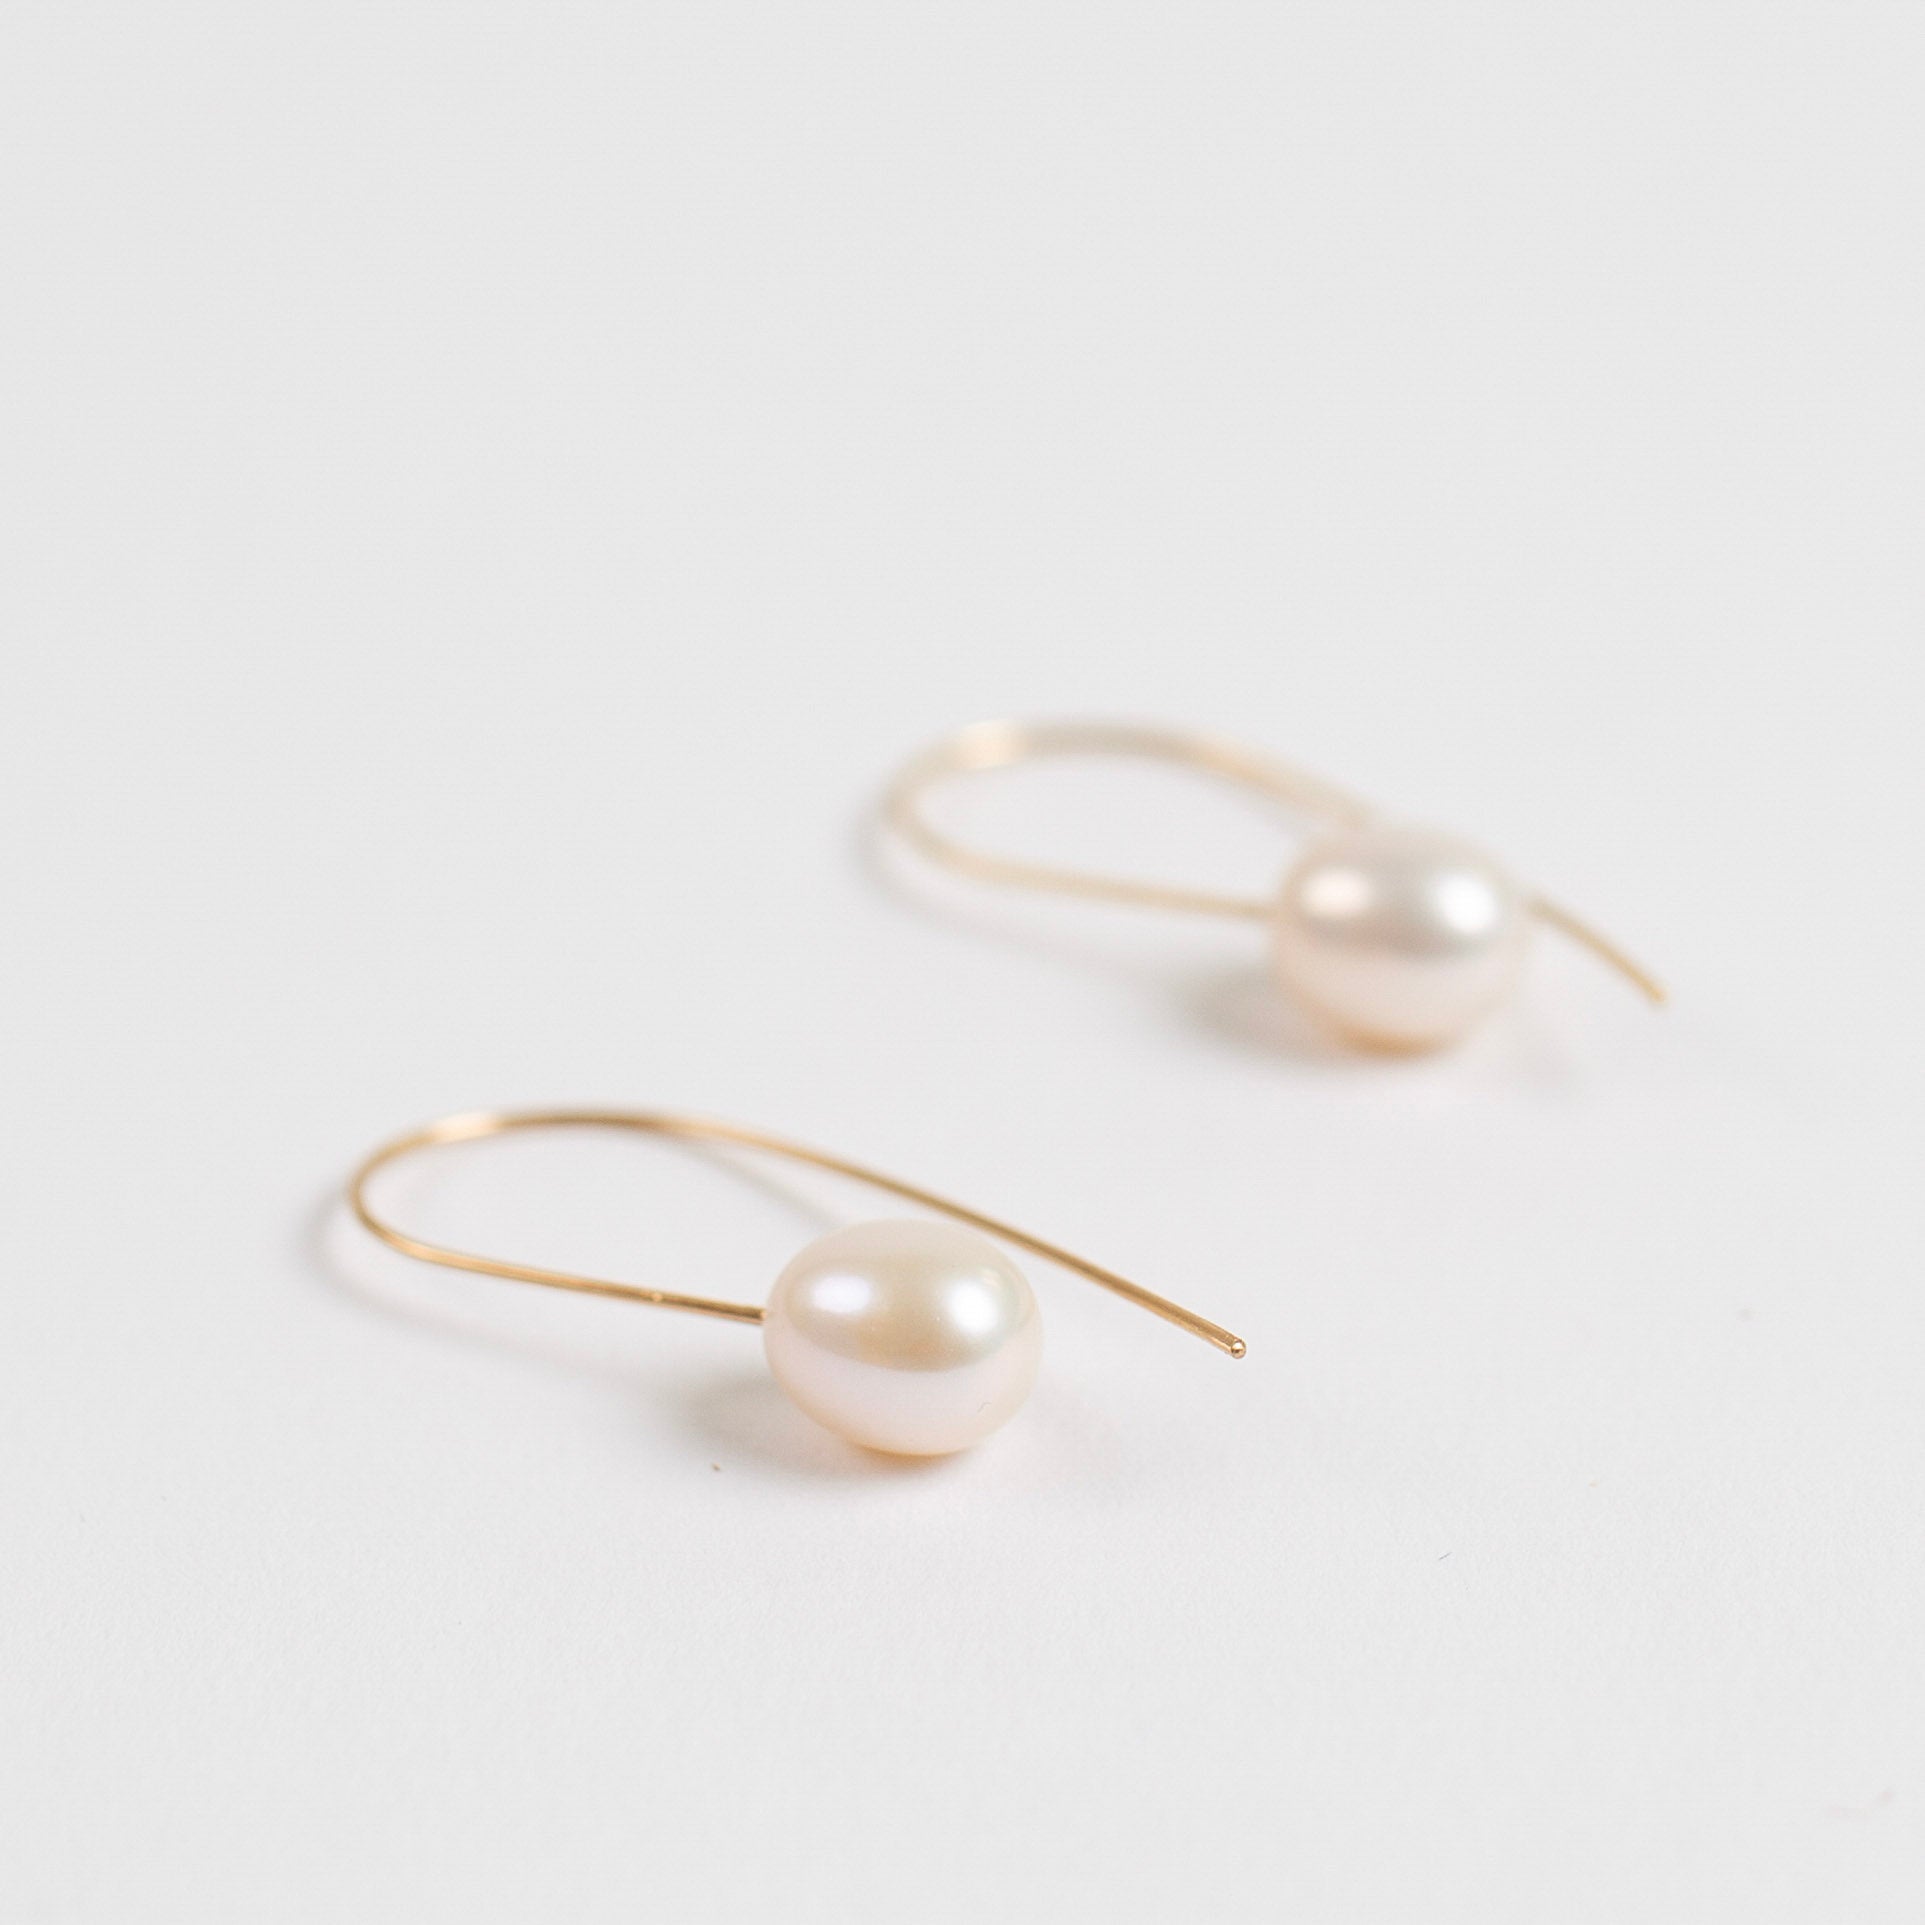 Rosanne Pugliese <br>Small Oval Freshwater Pearls